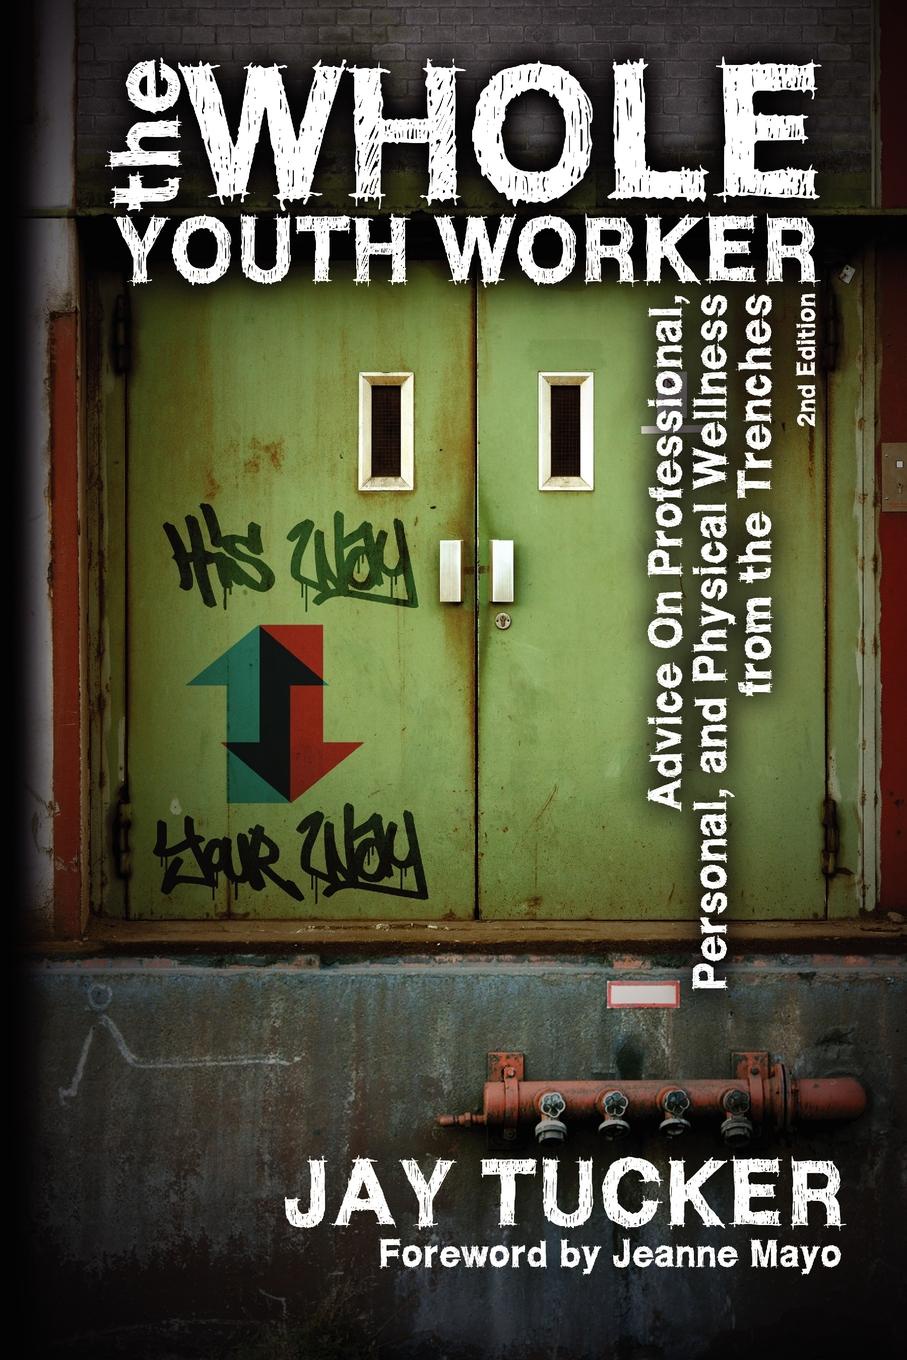 фото The Whole Youth Worker. Advice on Professional, Personal, and Physical Wellness from the Trenches, 2nd Ed.